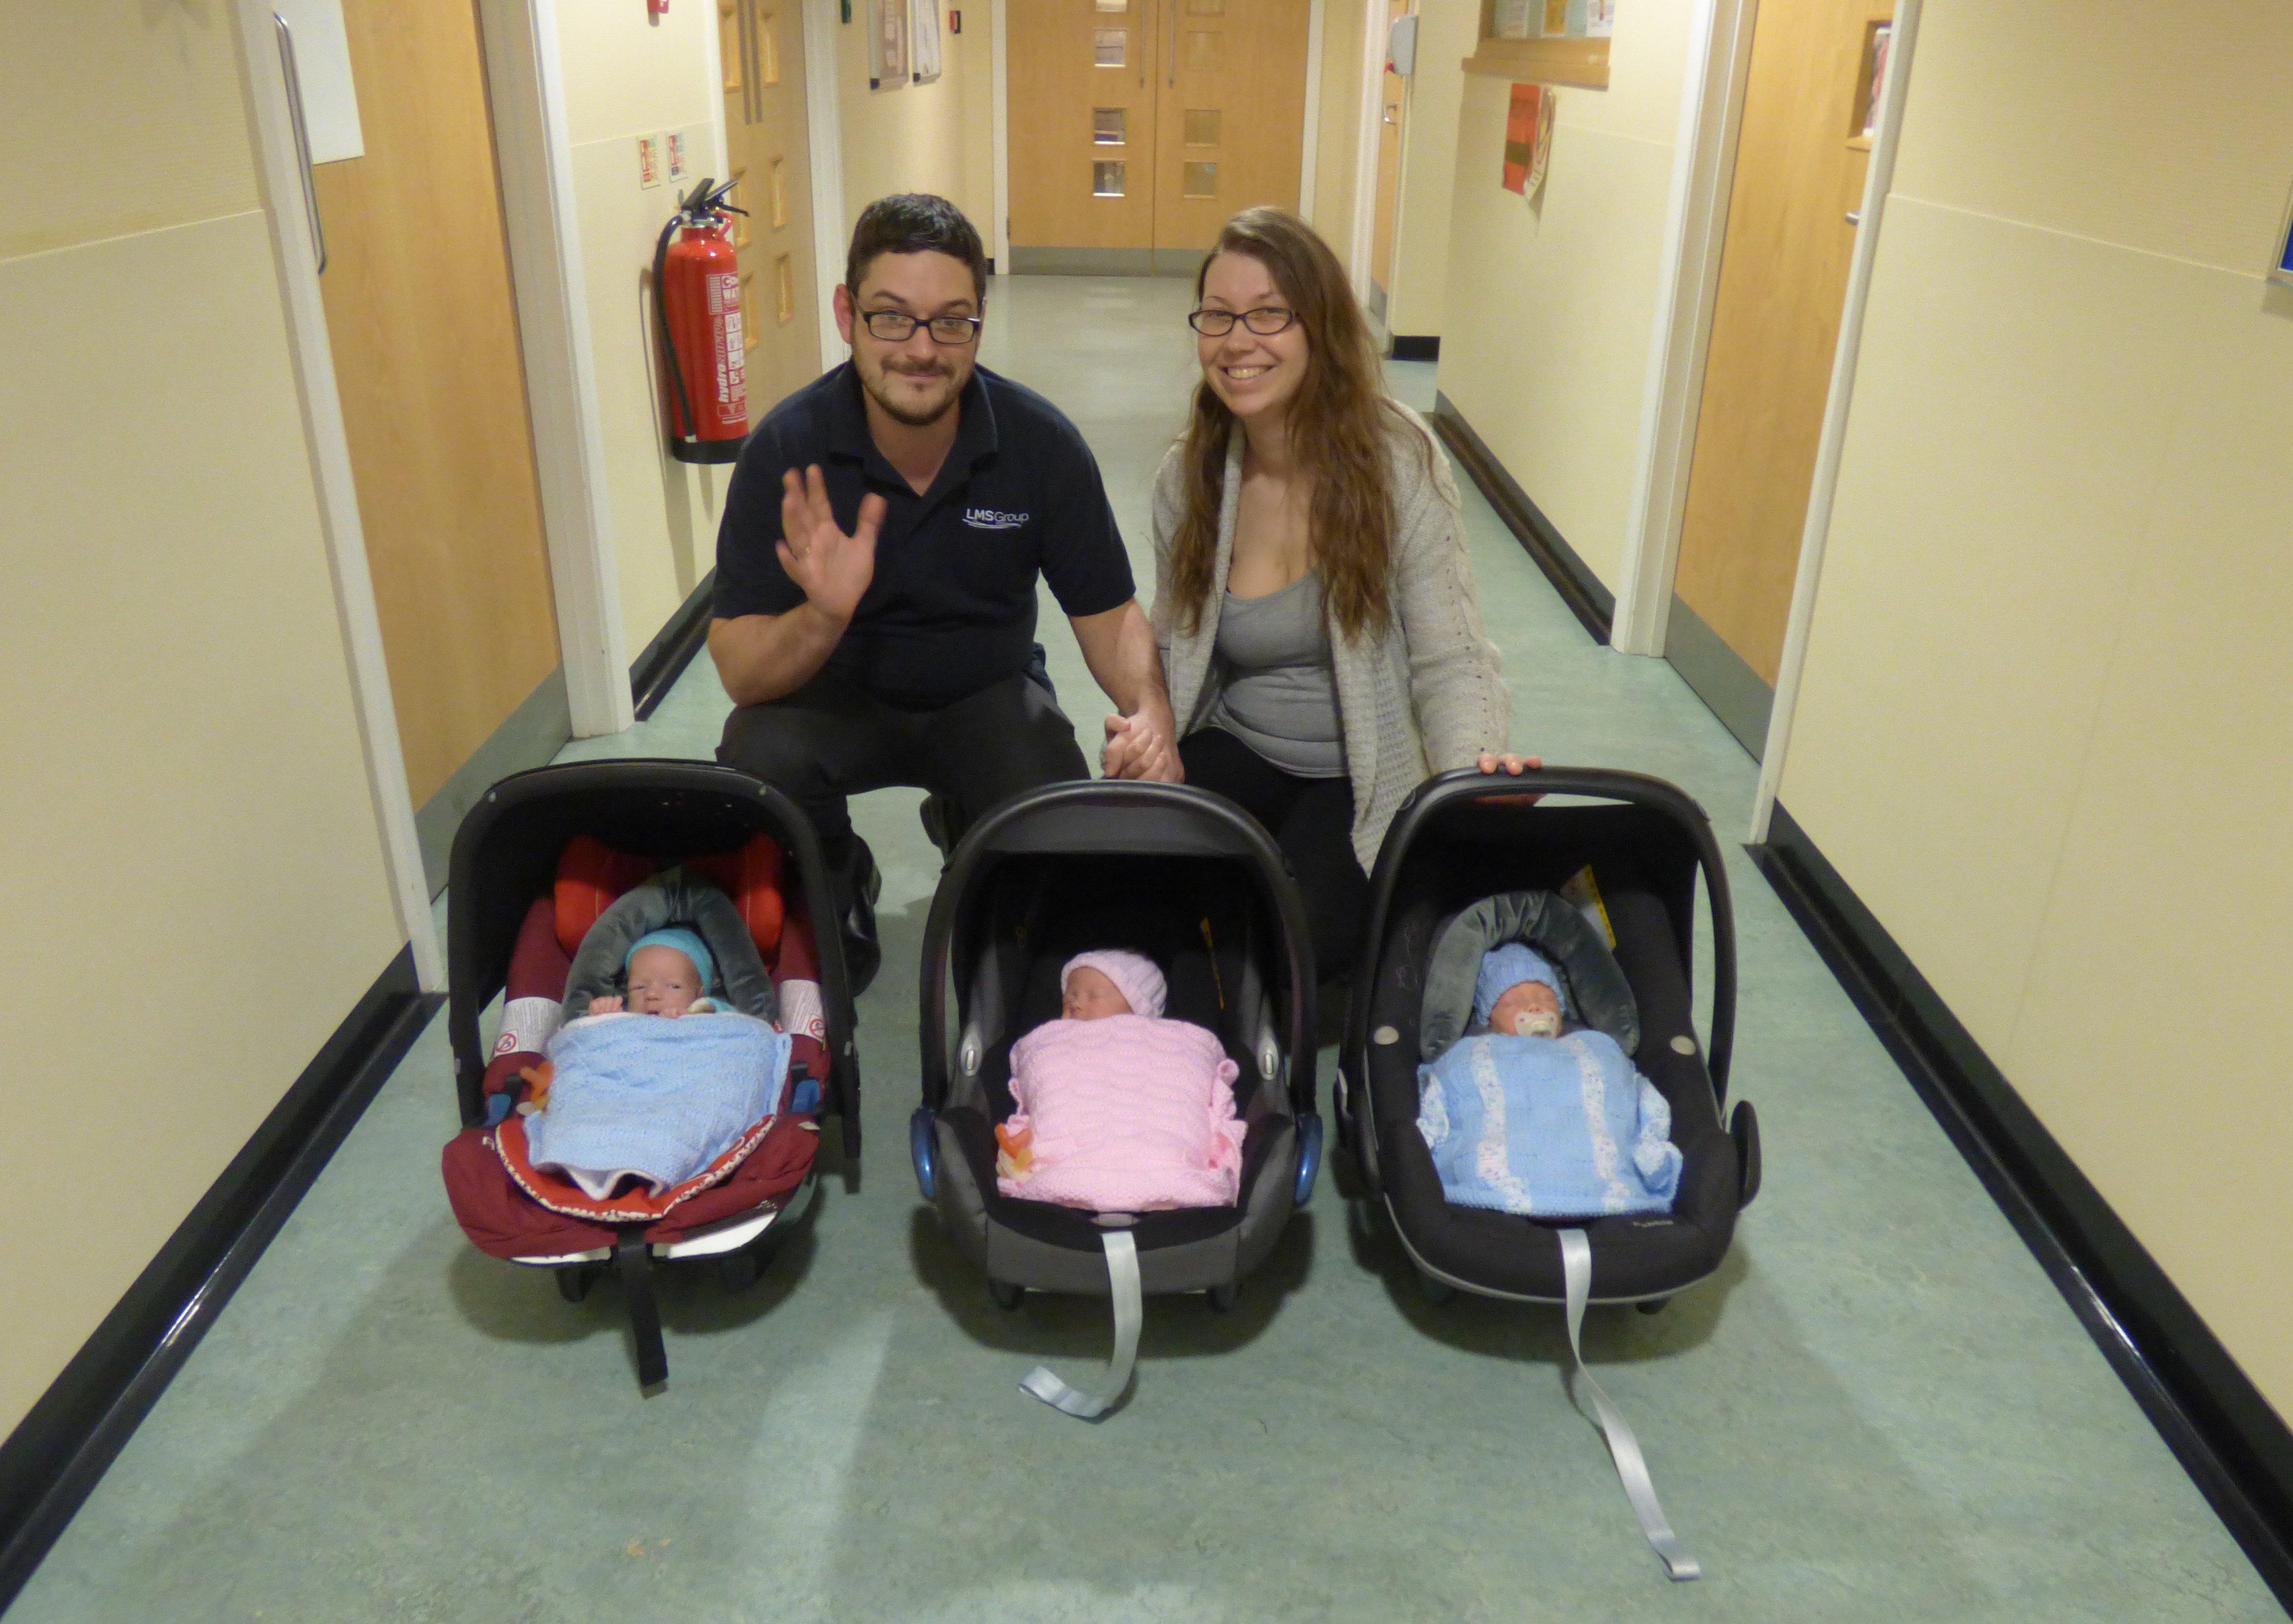 Cheryl Carter and Chris Pegrum from Yapton have triplets: Violet, Frank, and William. Cheryl, 34, and Chris, 33, from Blenheim Road, Yapton, with her triplets